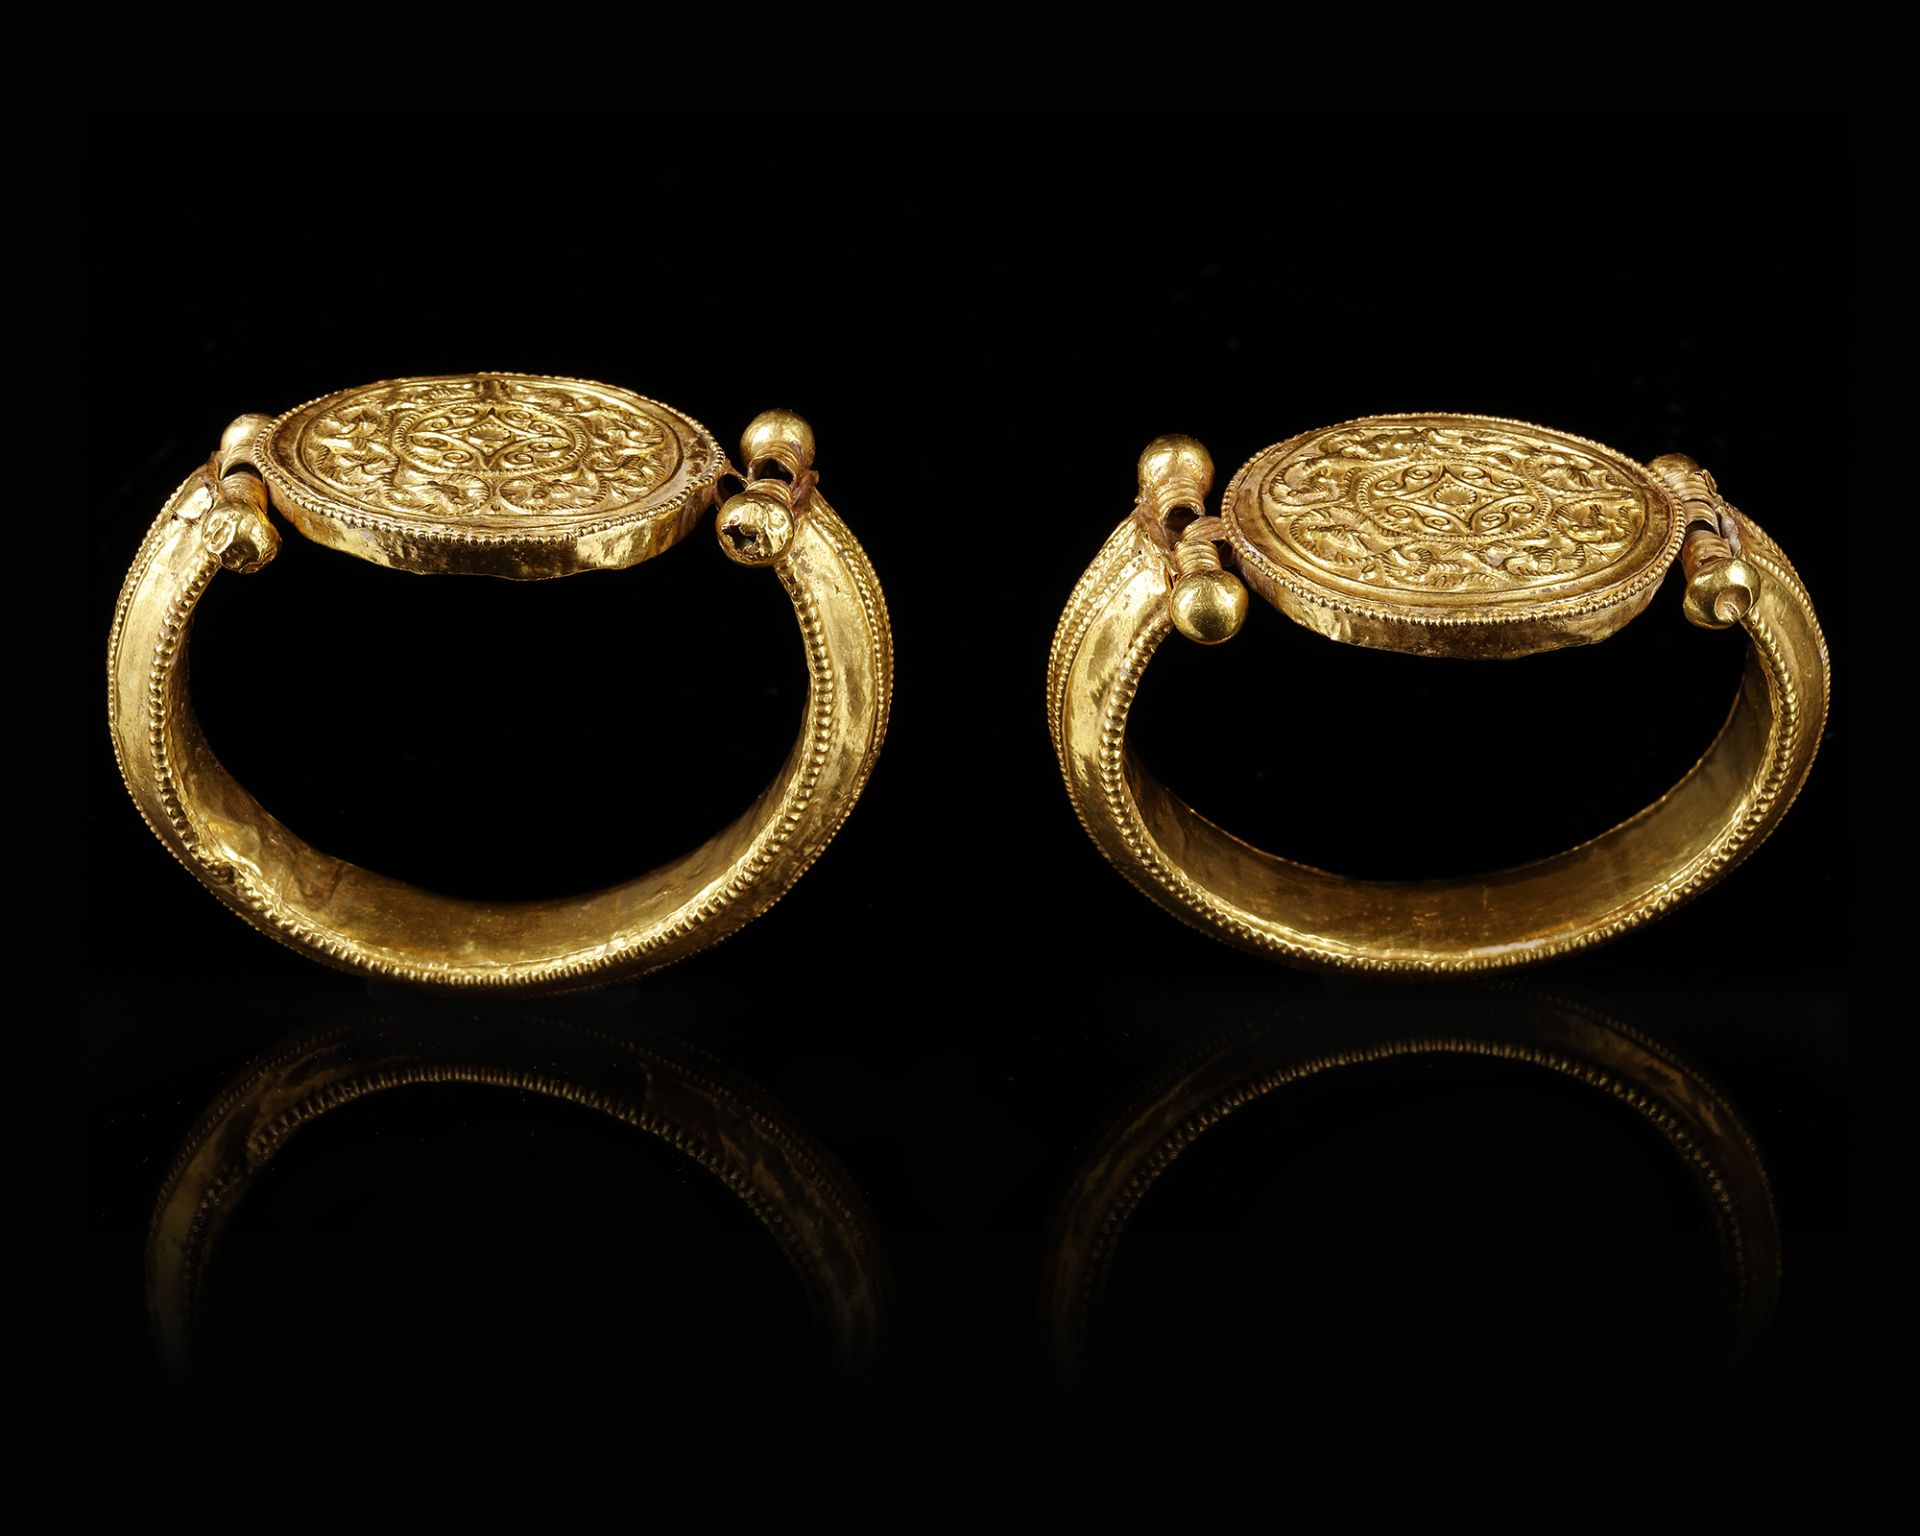 A RARE PAIR OF A FATIMID GOLD BRACELETS, POSSIBLY SYRIA, 11TH CENTURY - Image 6 of 7